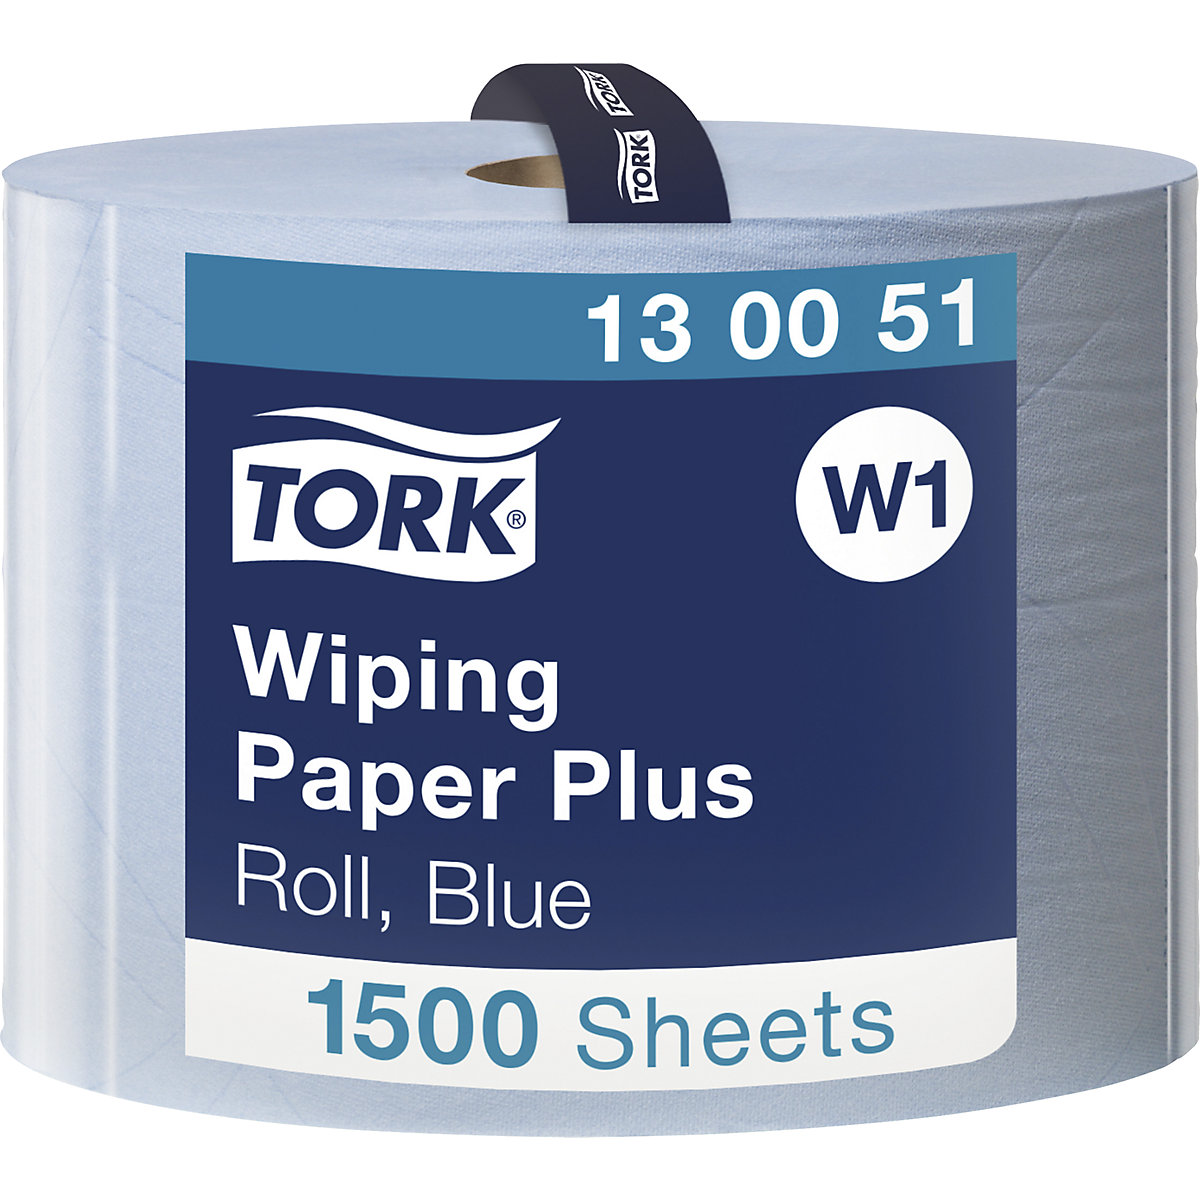 Multi-purpose paper wipes, strong – TORK